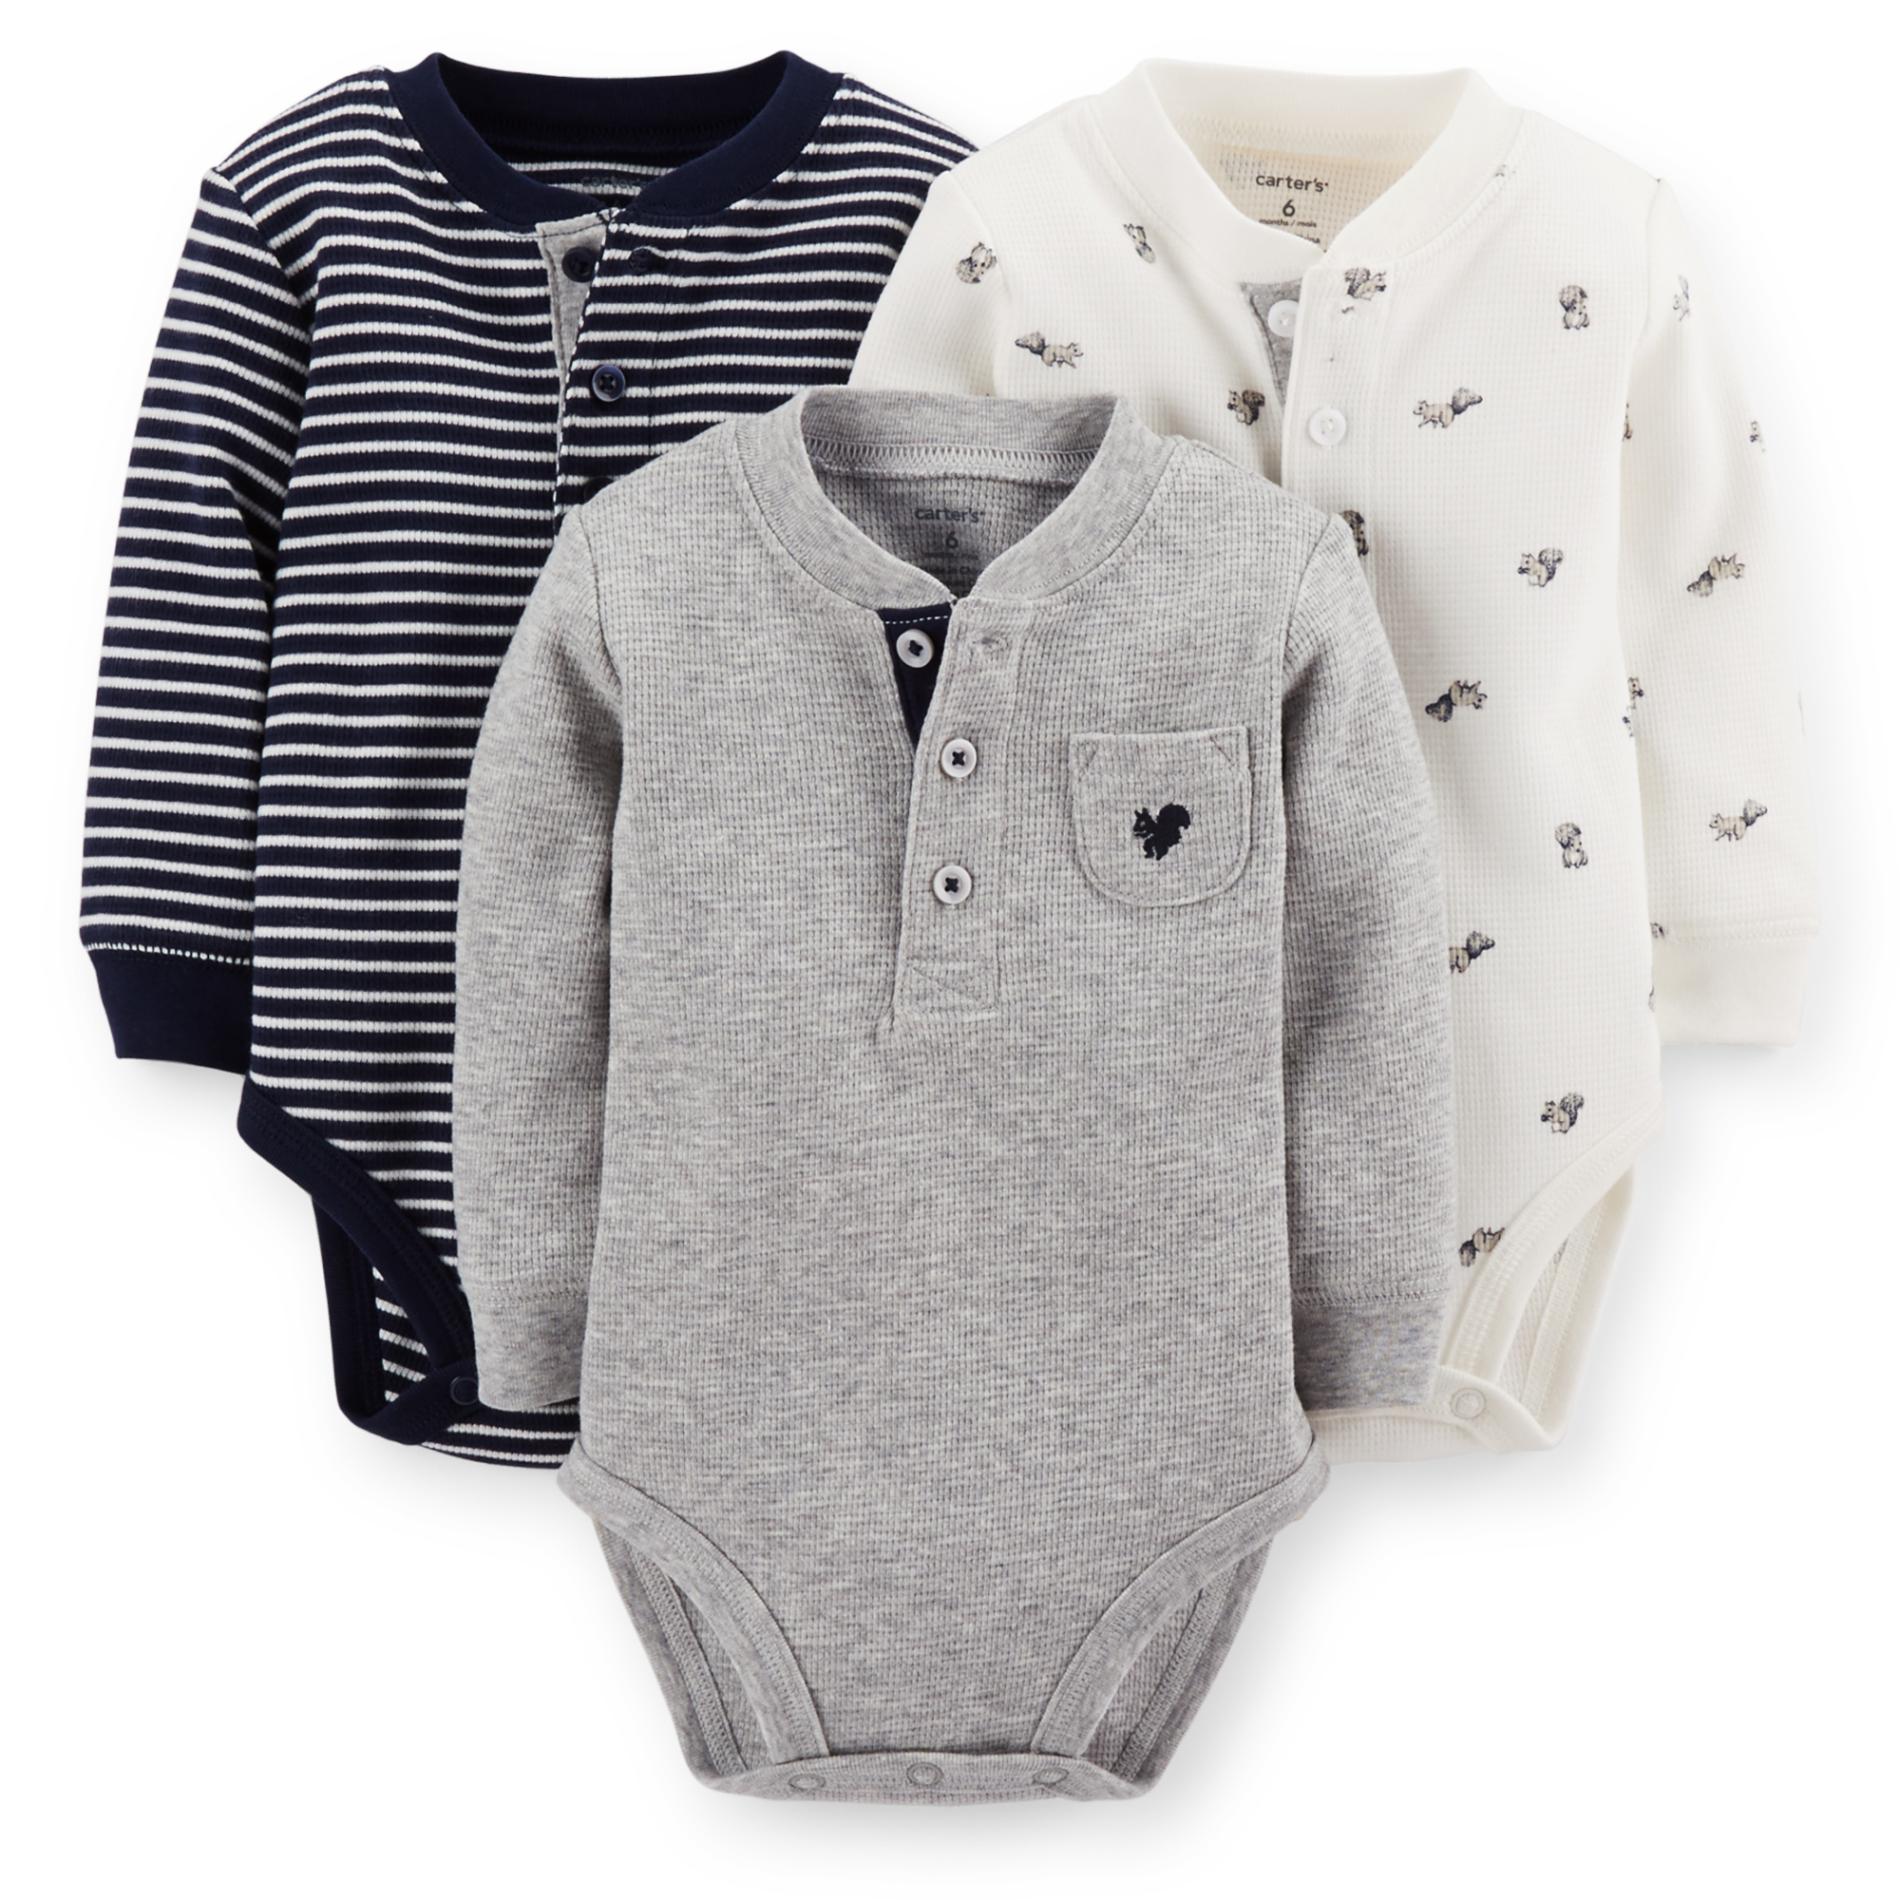 Carter's Newborn & Infant Boy's 3-Pack Thermal Henley Bodysuits - Striped & Squirrel